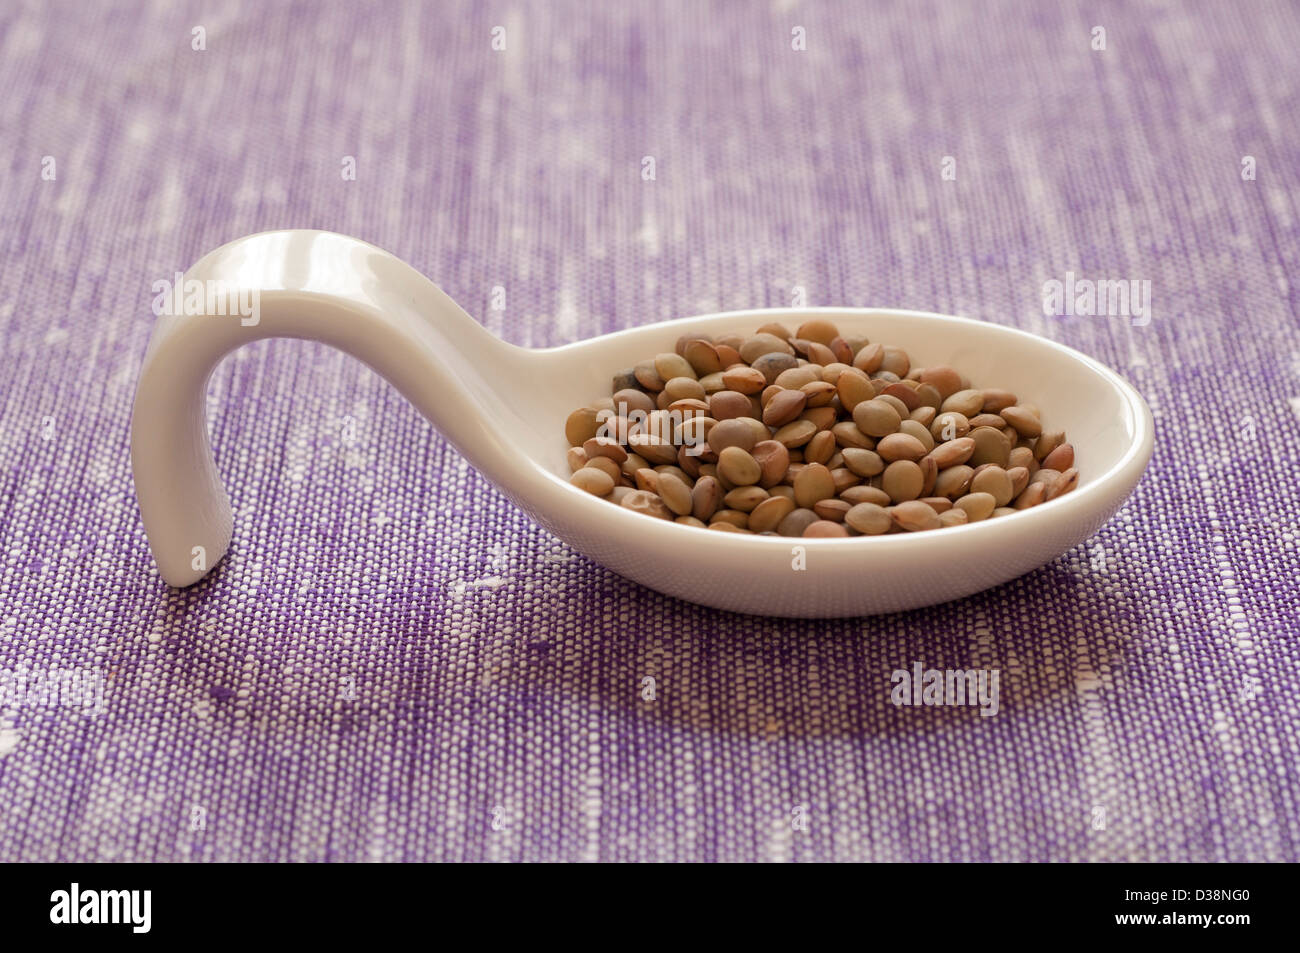 Close-up view of Organic Umbrian small Lentils Stock Photo